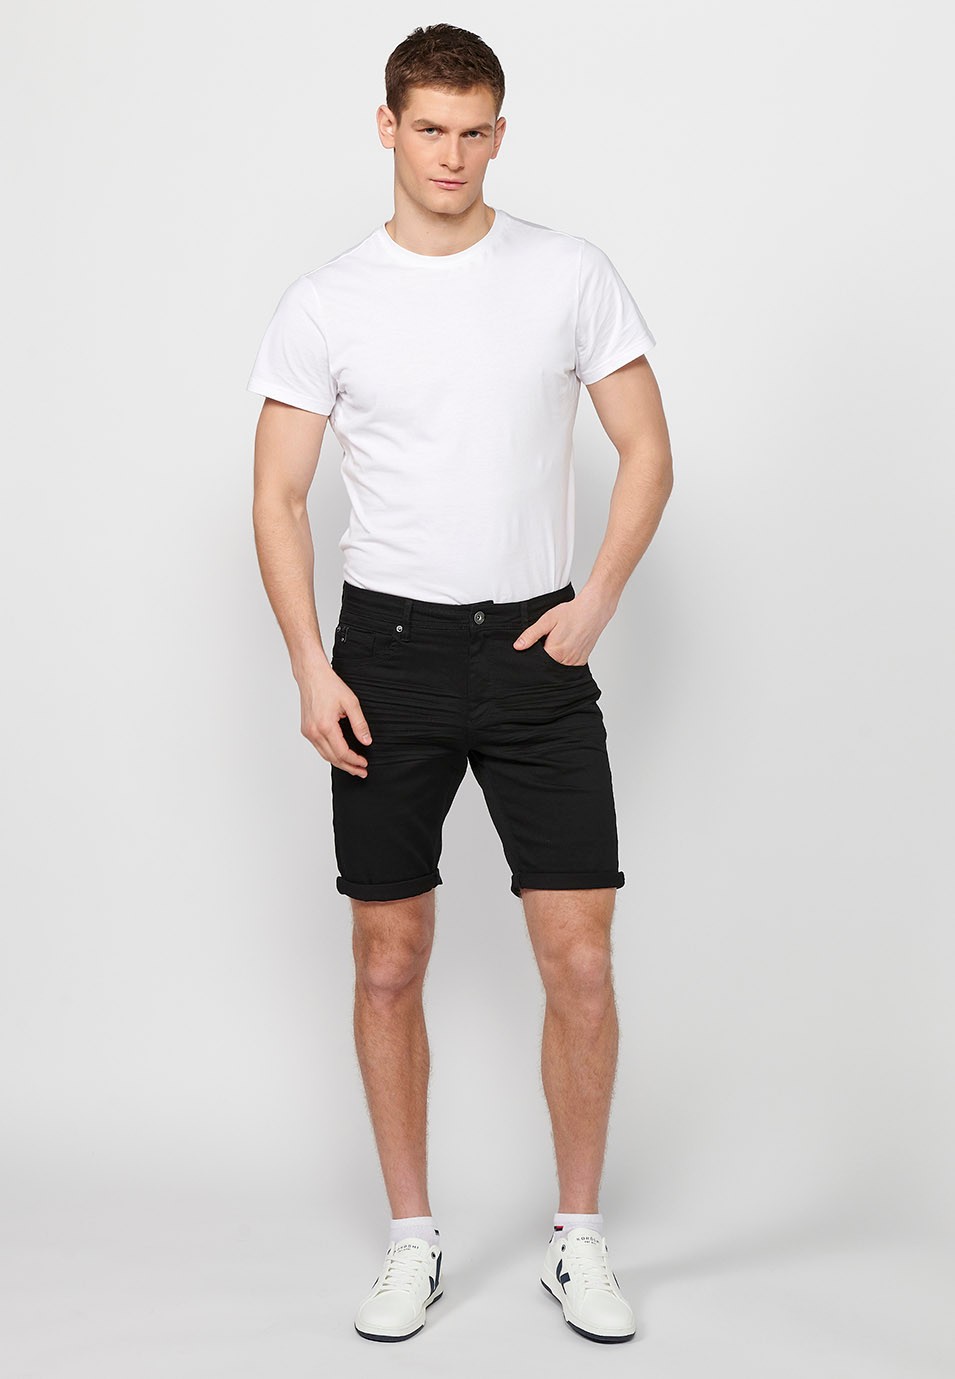 Denim Bermuda shorts with cuffed finish and front zipper and button closure. Five pockets, one black color pocket for men